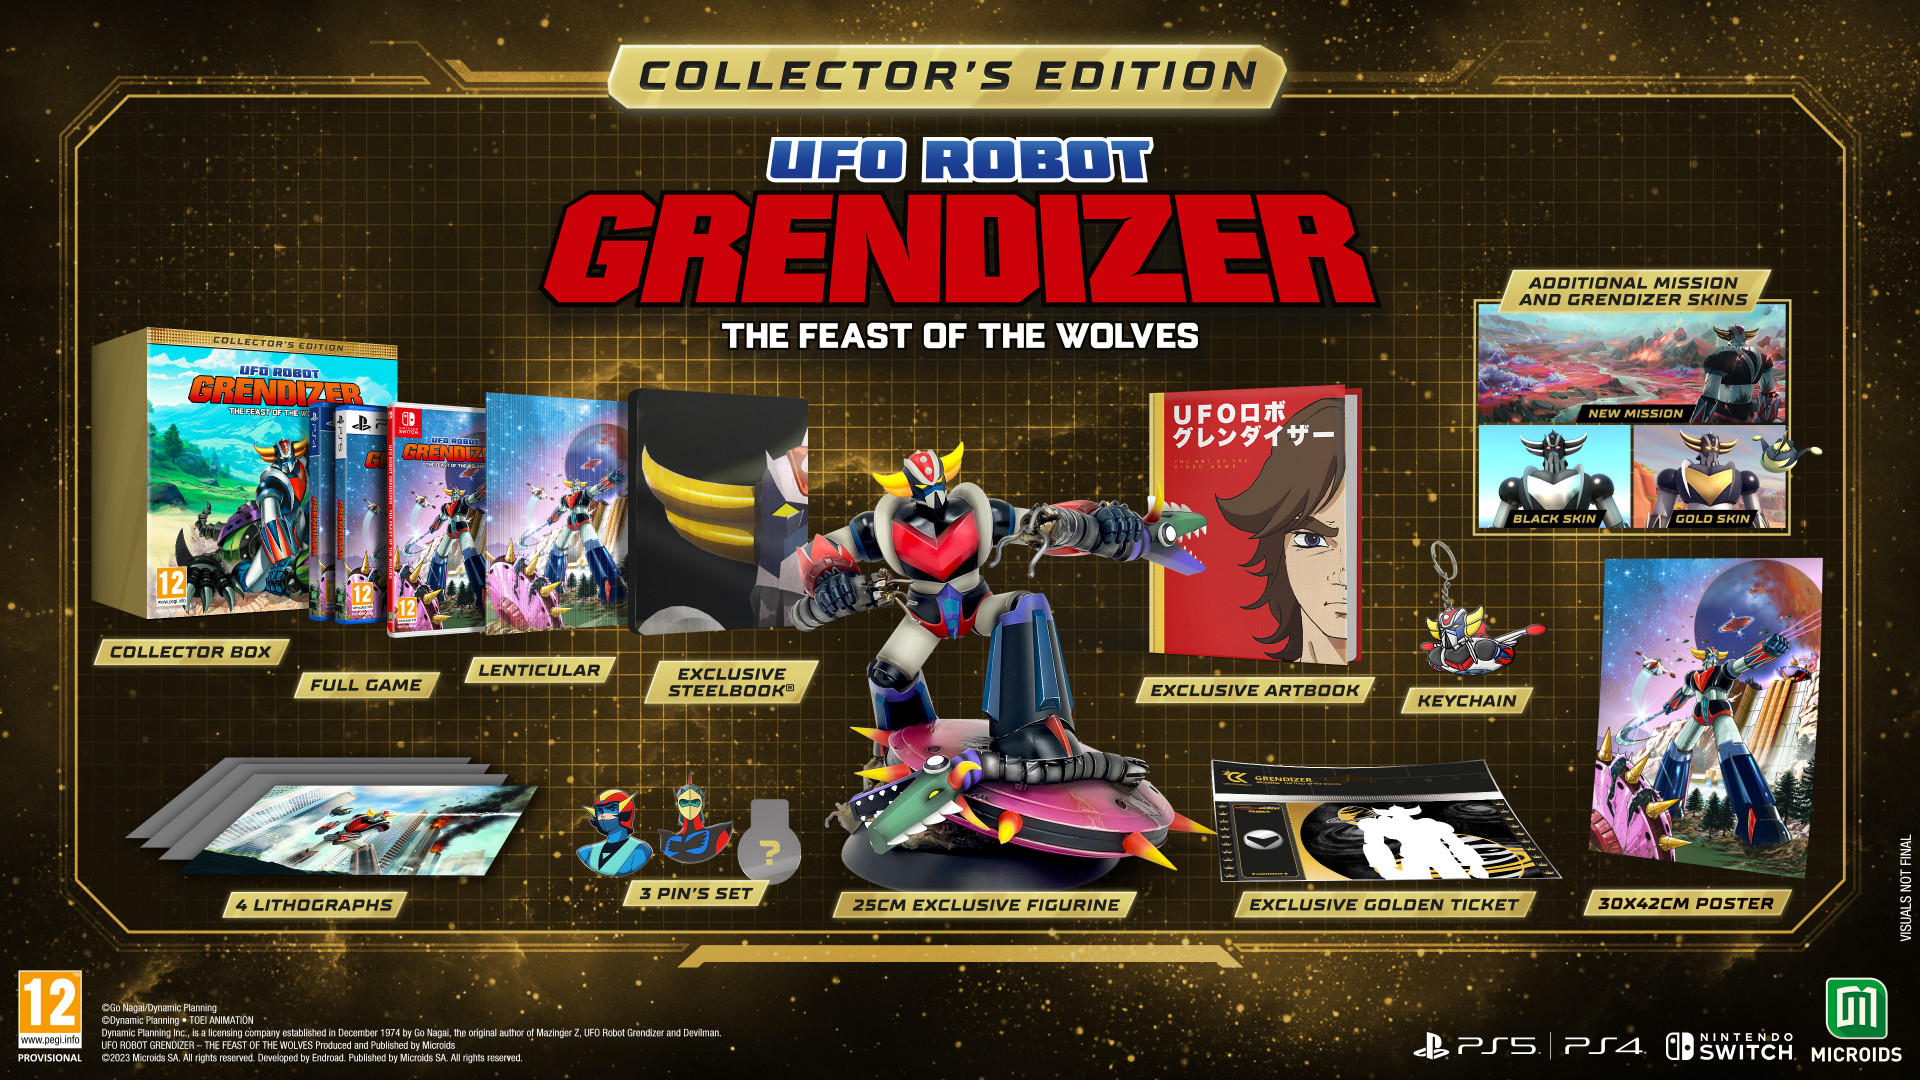 UFO Robot Grendizer: The Feast of the Wolves Collector's Edition